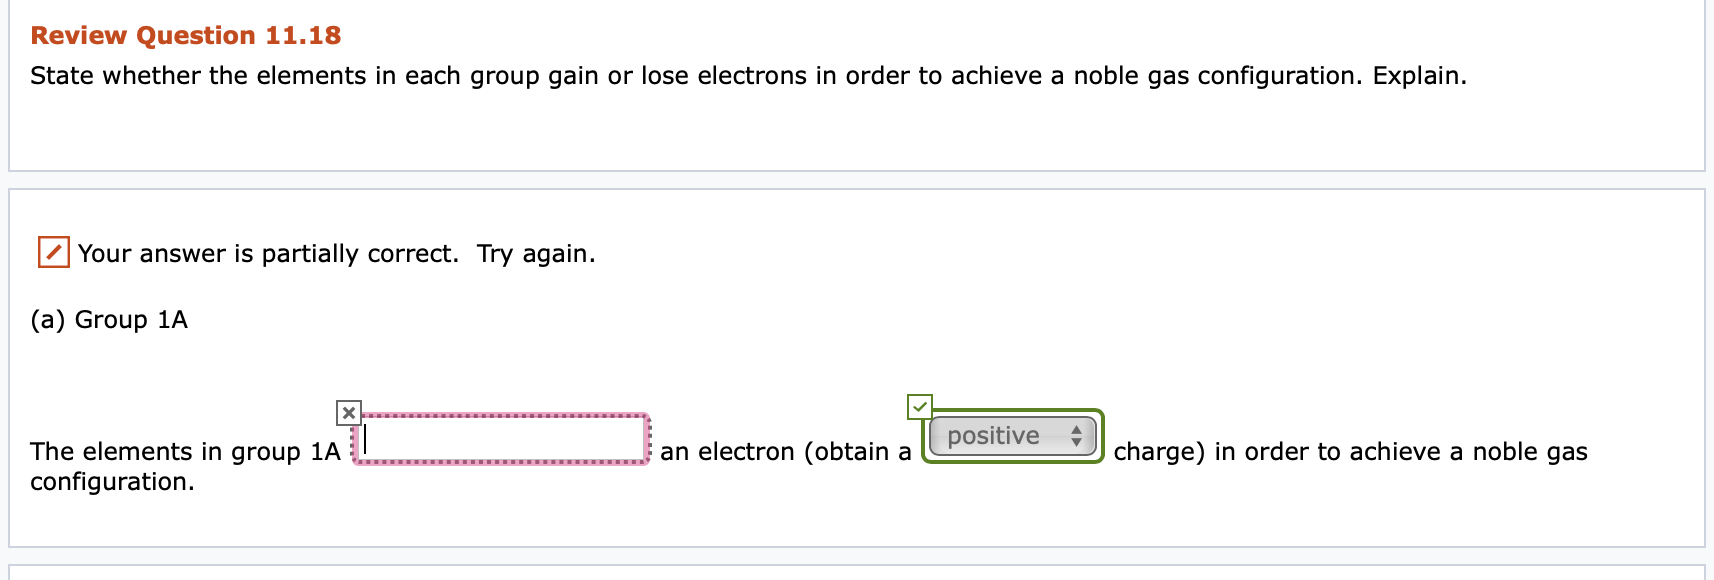 (a) Group 1A
positive +
The elements in group 1A
configuration.
an electron (obtain a
charge) in order to achieve a noble gas
...
